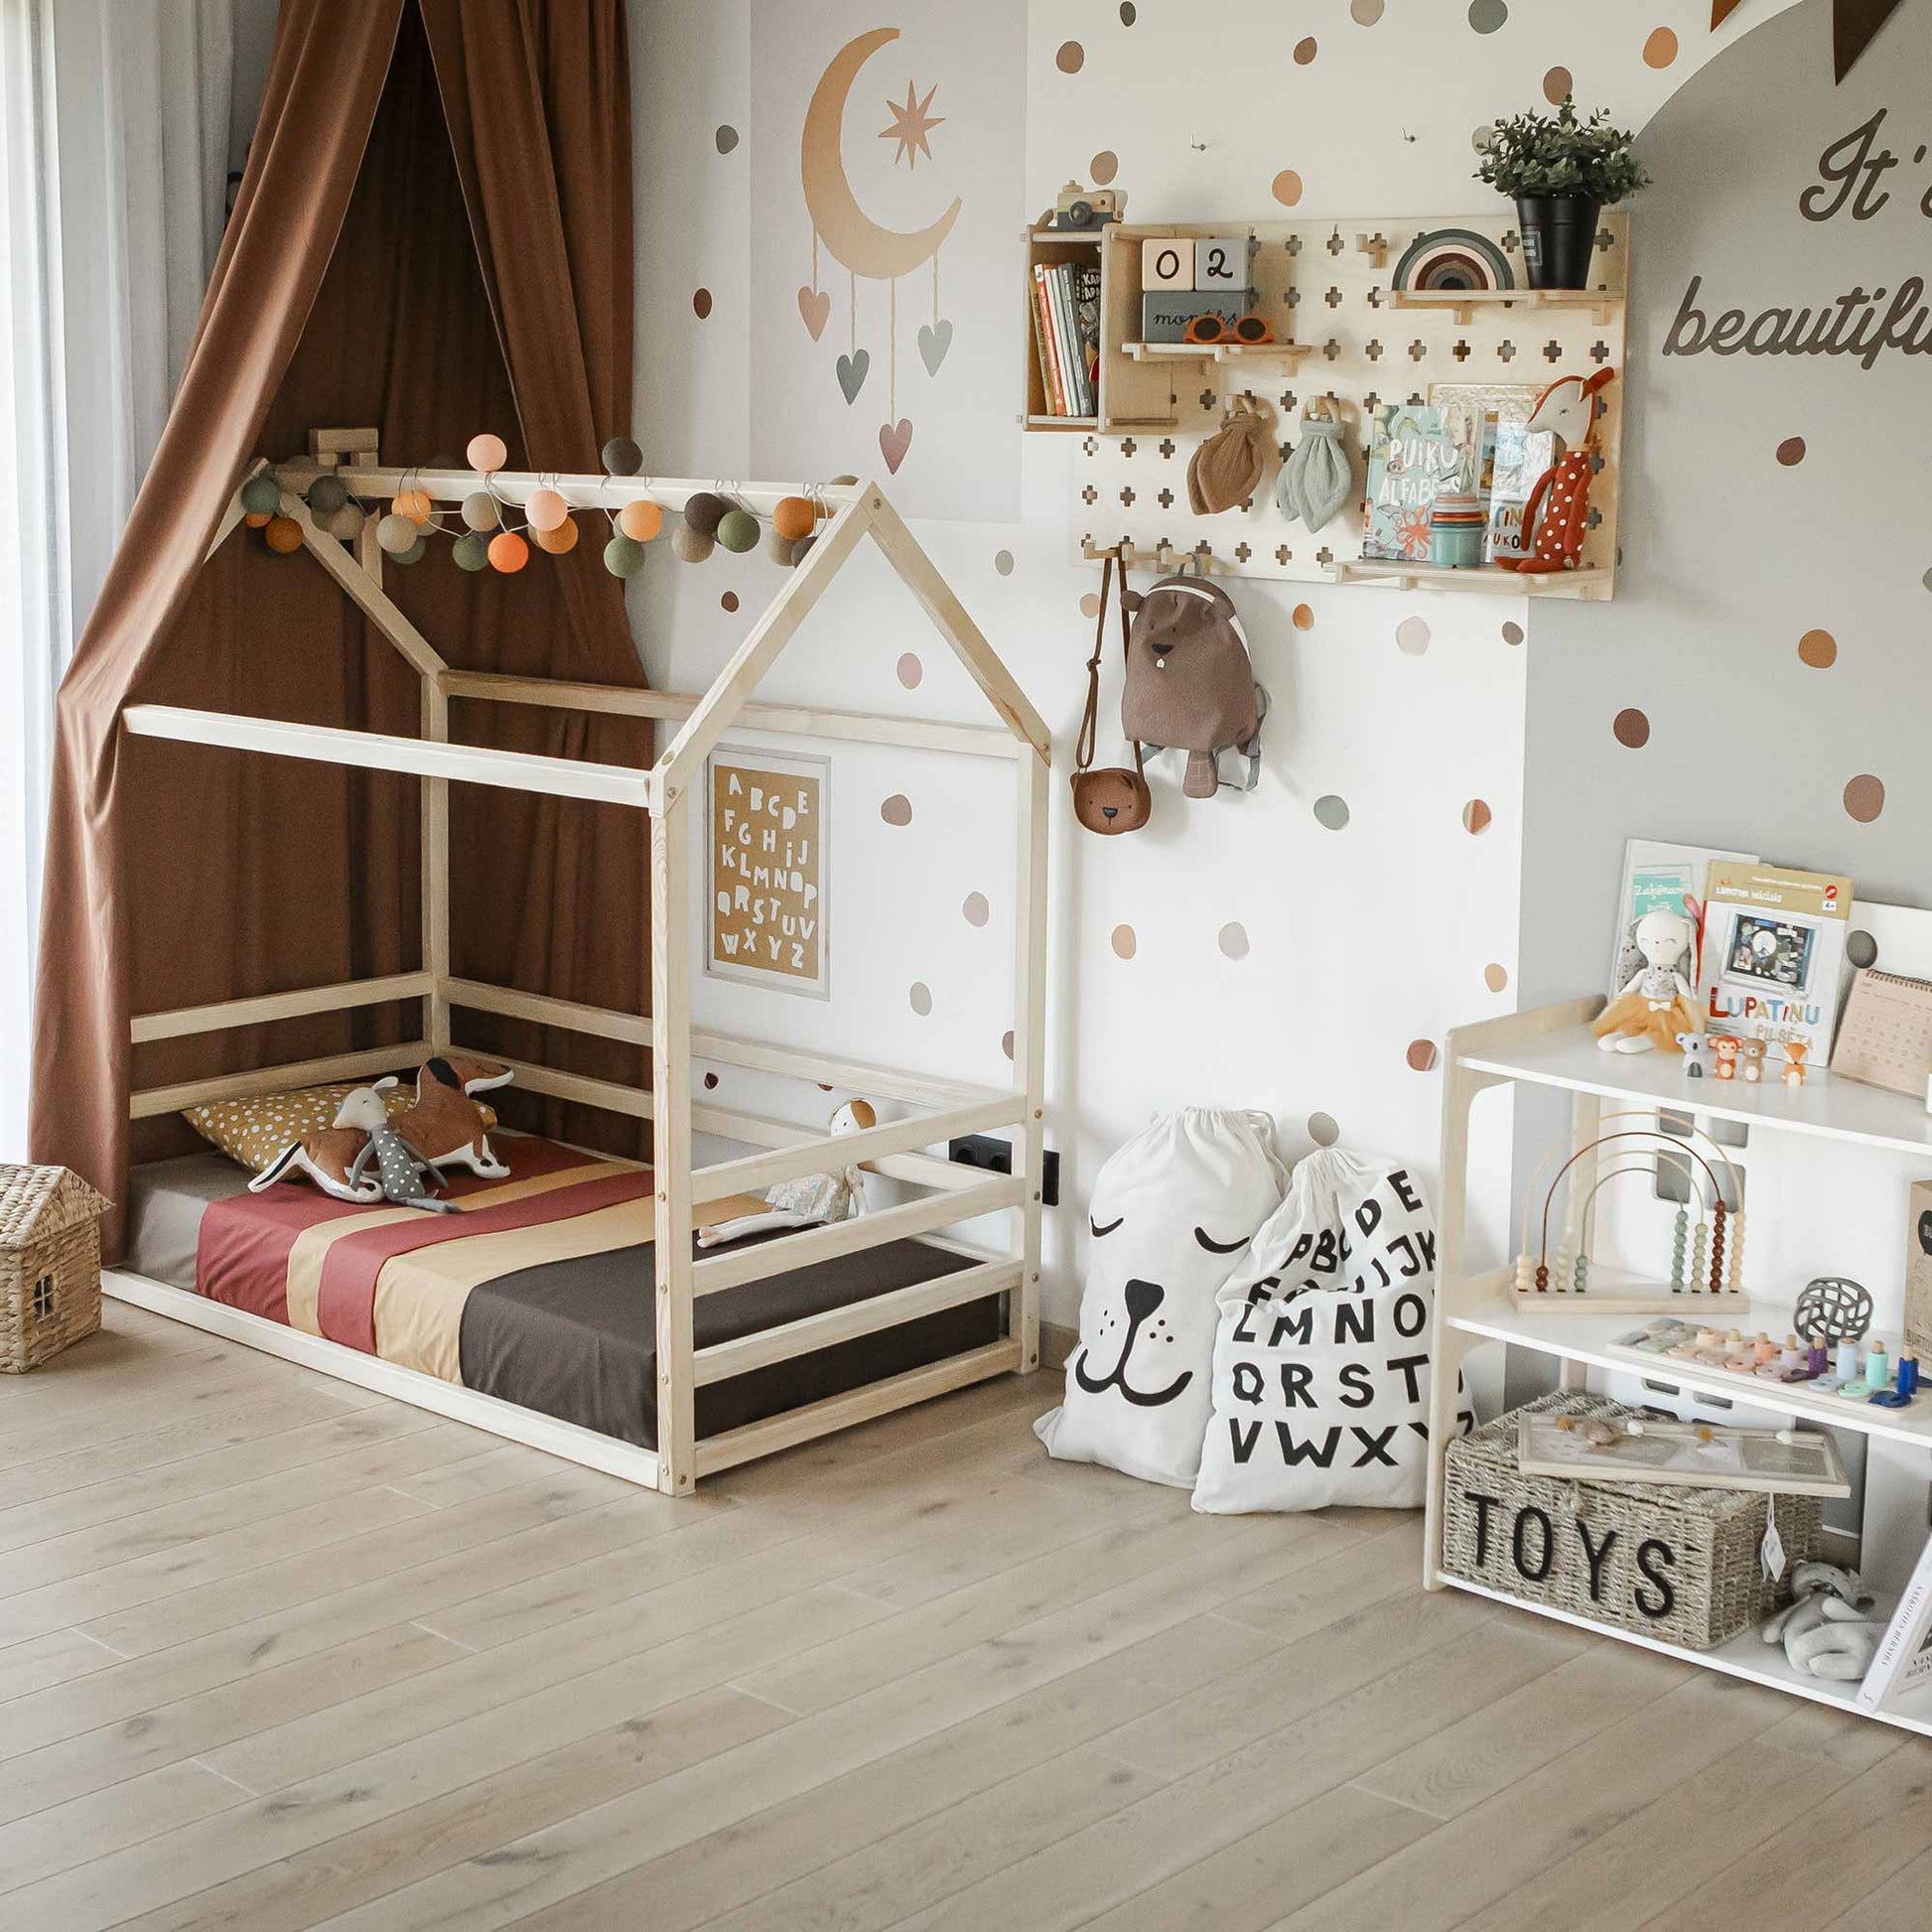 A child's bedroom with a wooden house-frame bed, wall decorations, toys on Floating Shelves Pegboard, and a playful, organized atmosphere.